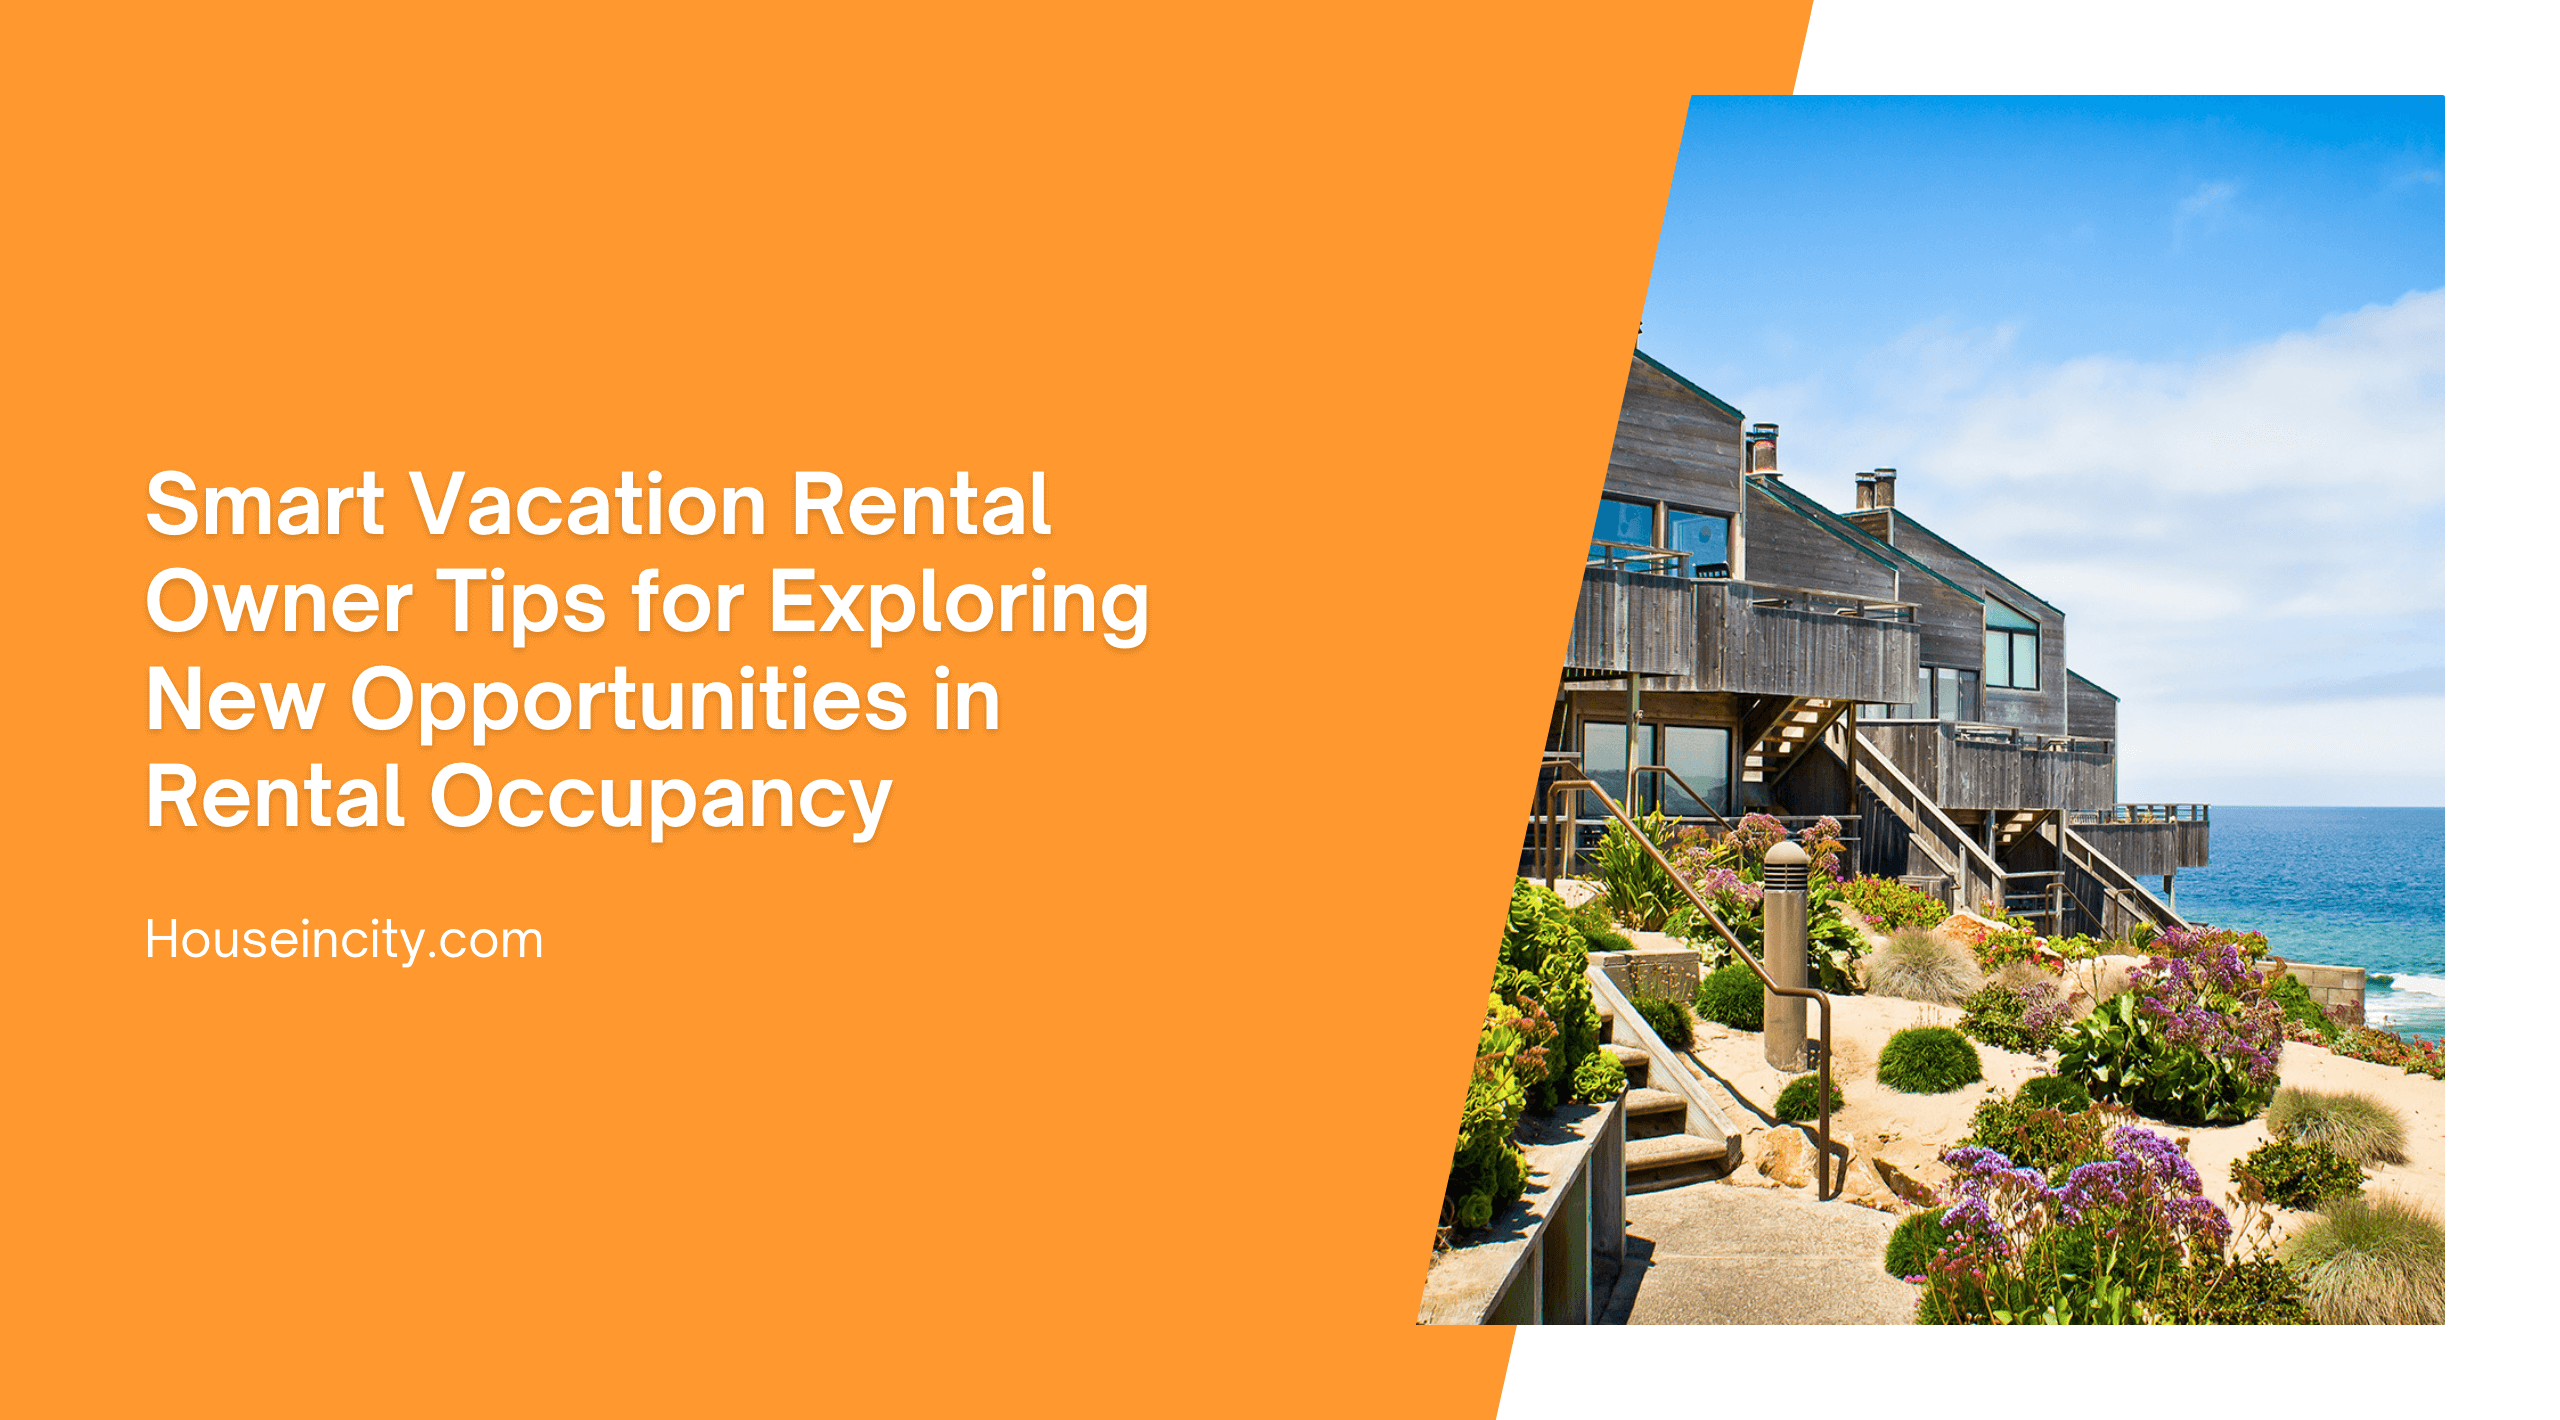 Smart Vacation Rental Owner Tips for Exploring New Opportunities in Rental Occupancy